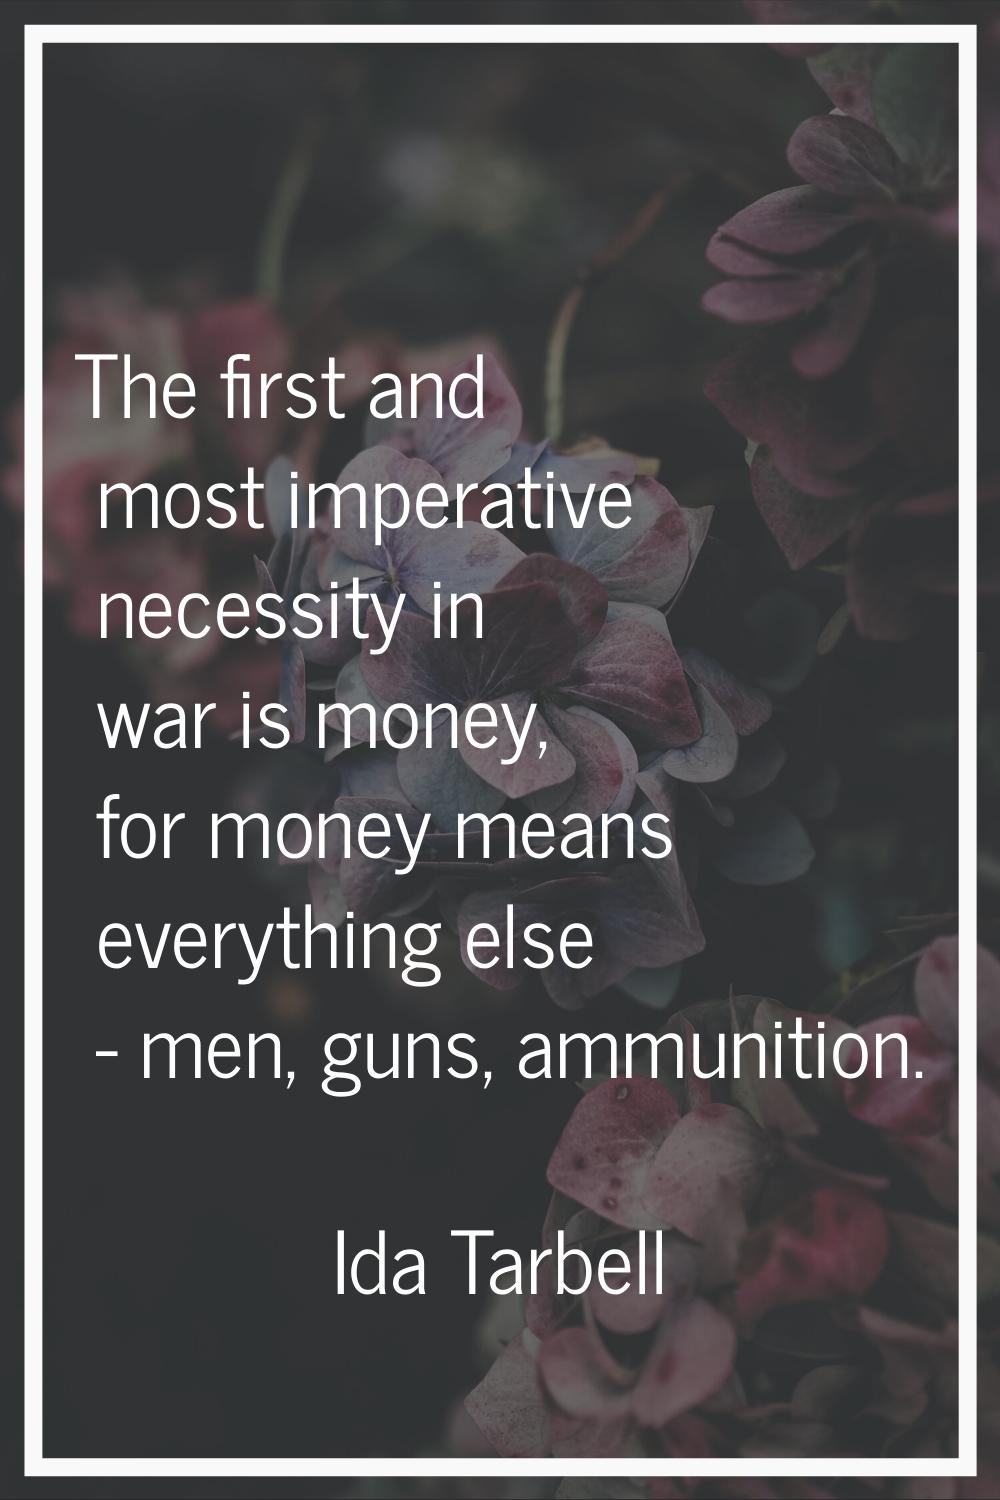 The first and most imperative necessity in war is money, for money means everything else - men, gun